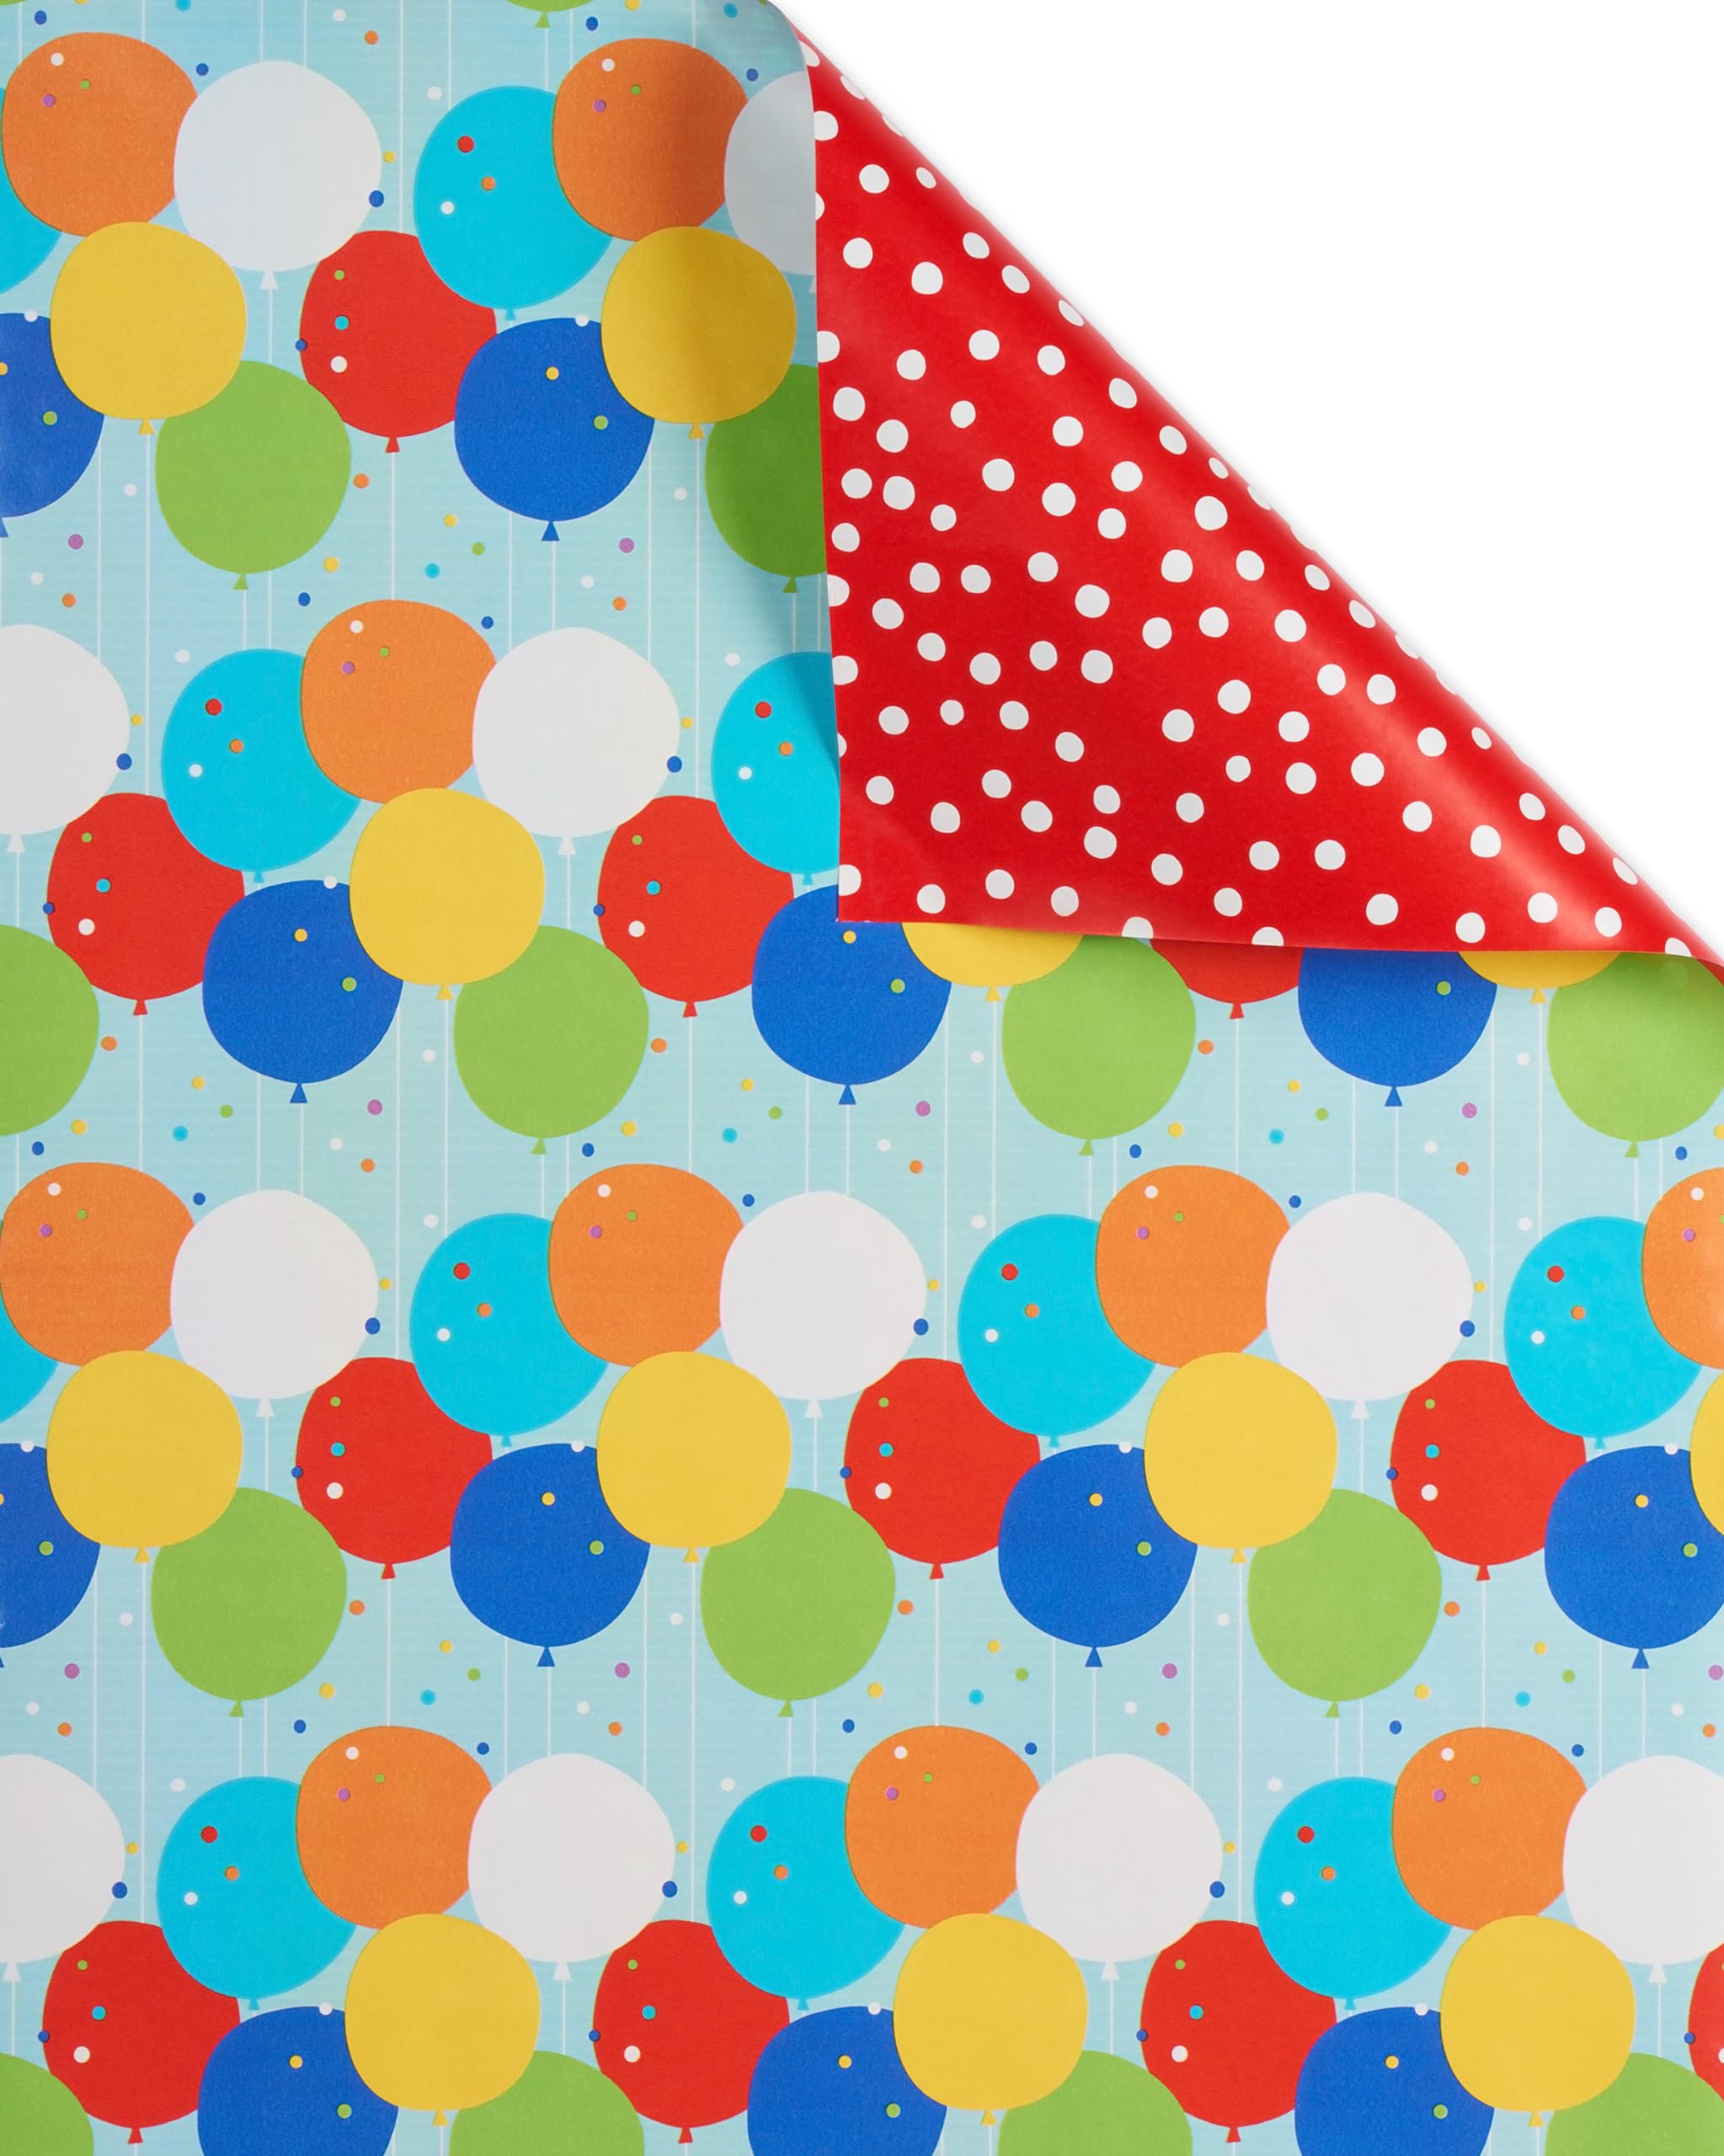 American Greetings Reversible Birthday Wrapping Paper, Stars, Polka Dots, and Balloons (3 Pack, 120 sq. ft)